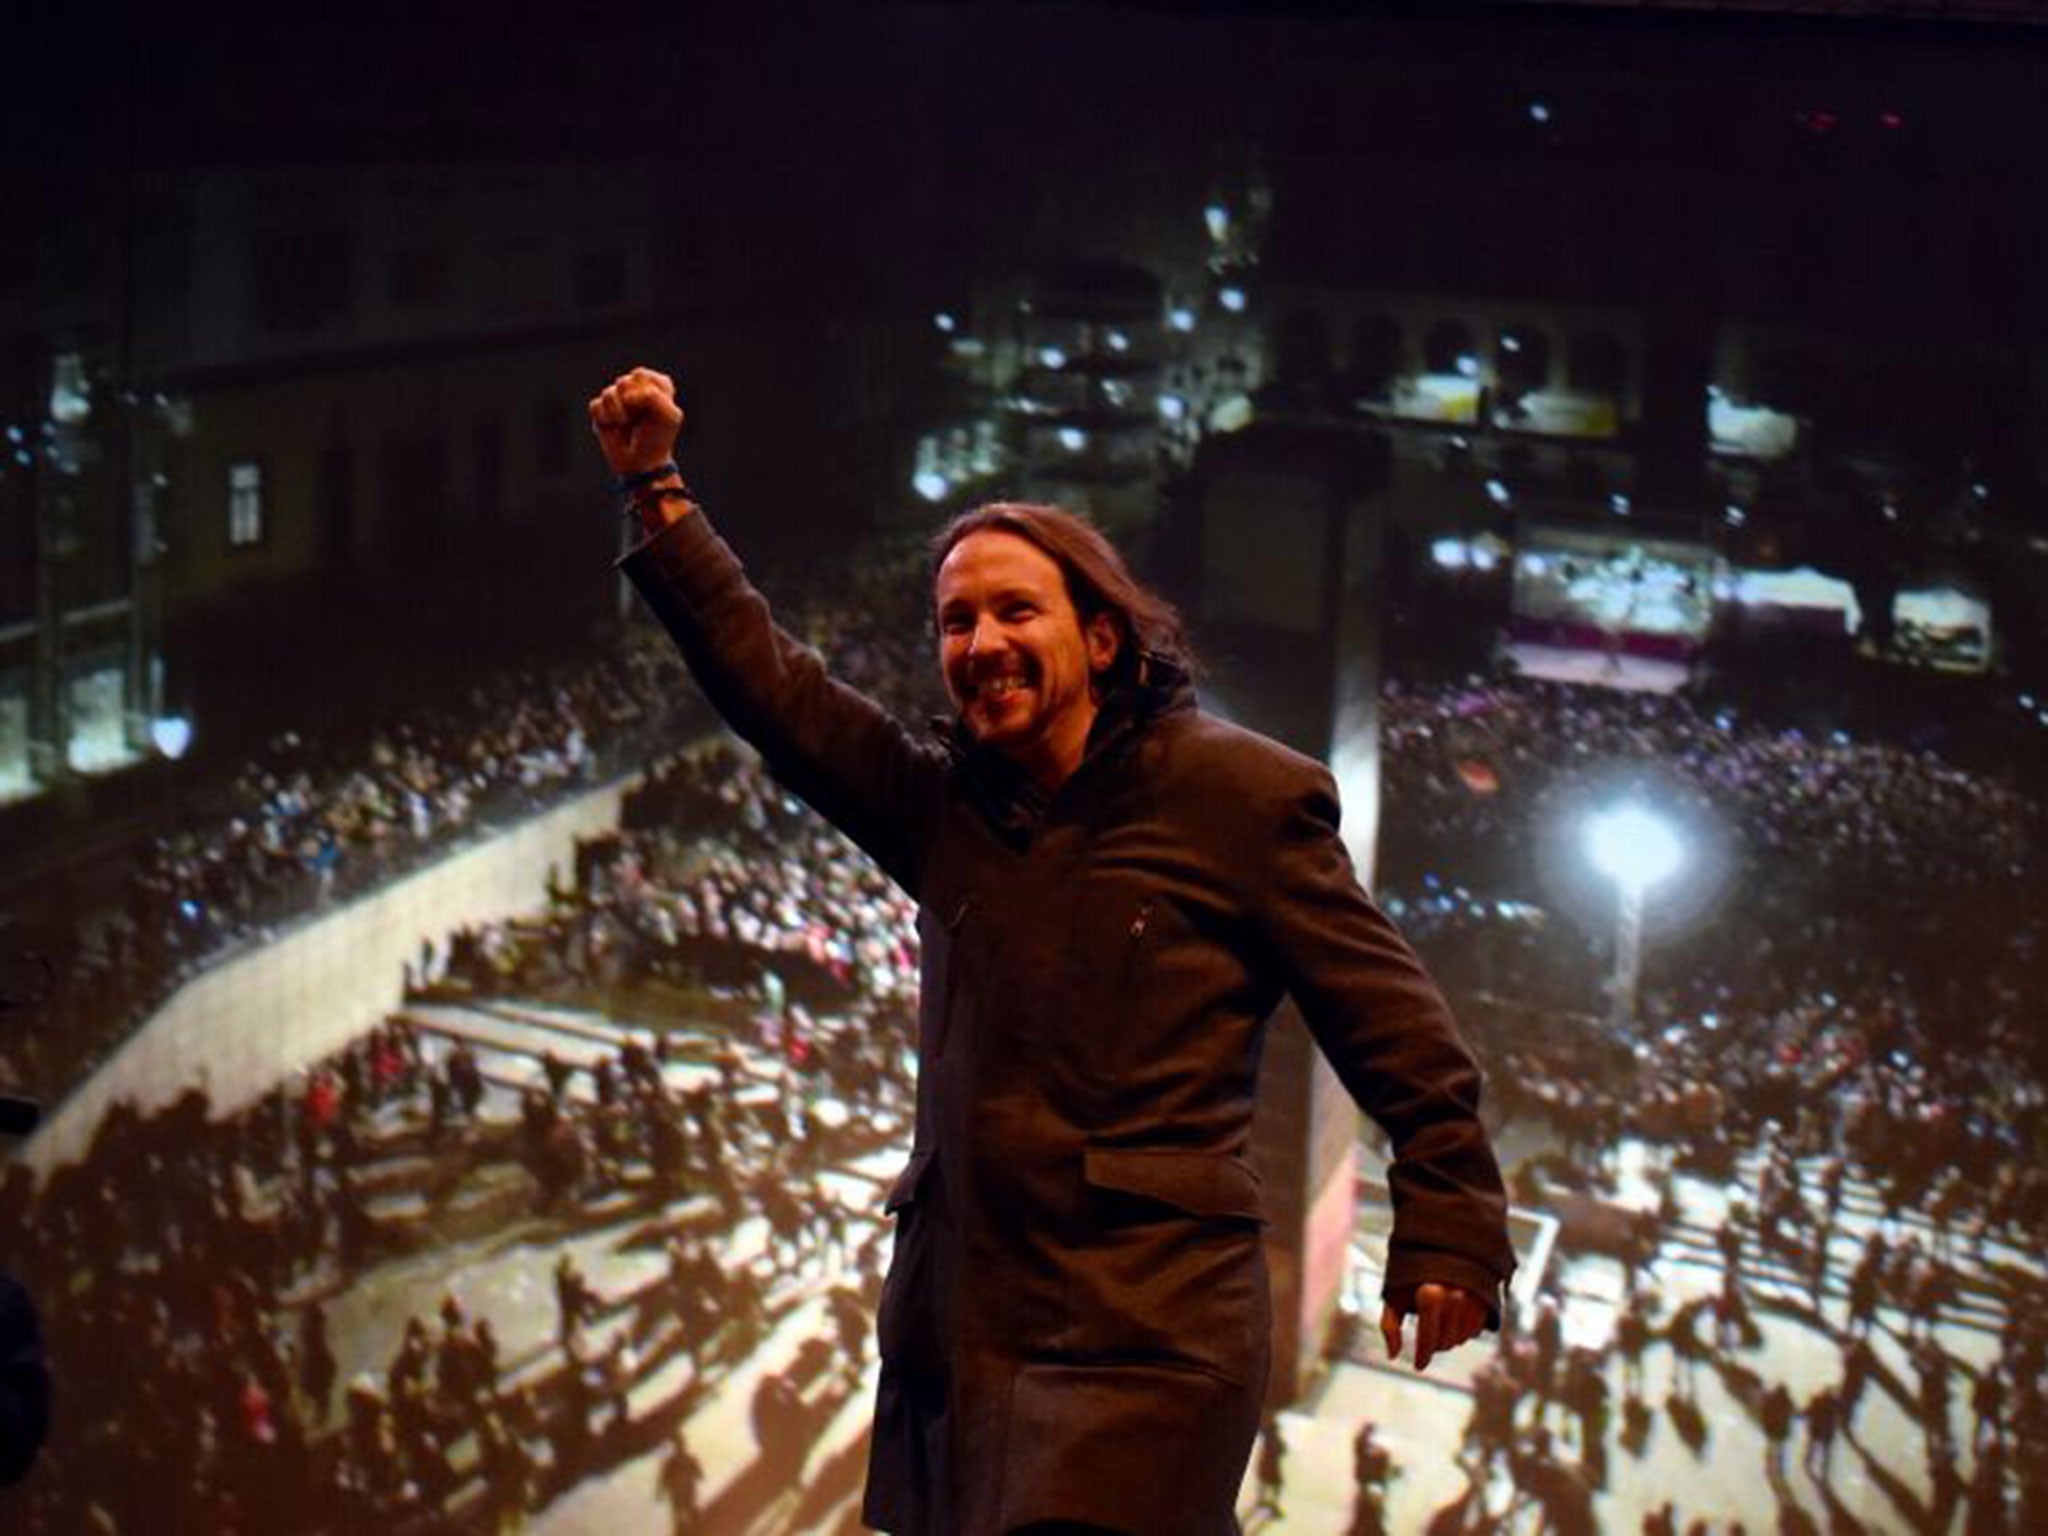 The Podemos leader, Pablo Iglesias, celebrating the results of the general elections in which the party won 69 seats in congress, ensuring the ruling PP no longer forms a majority